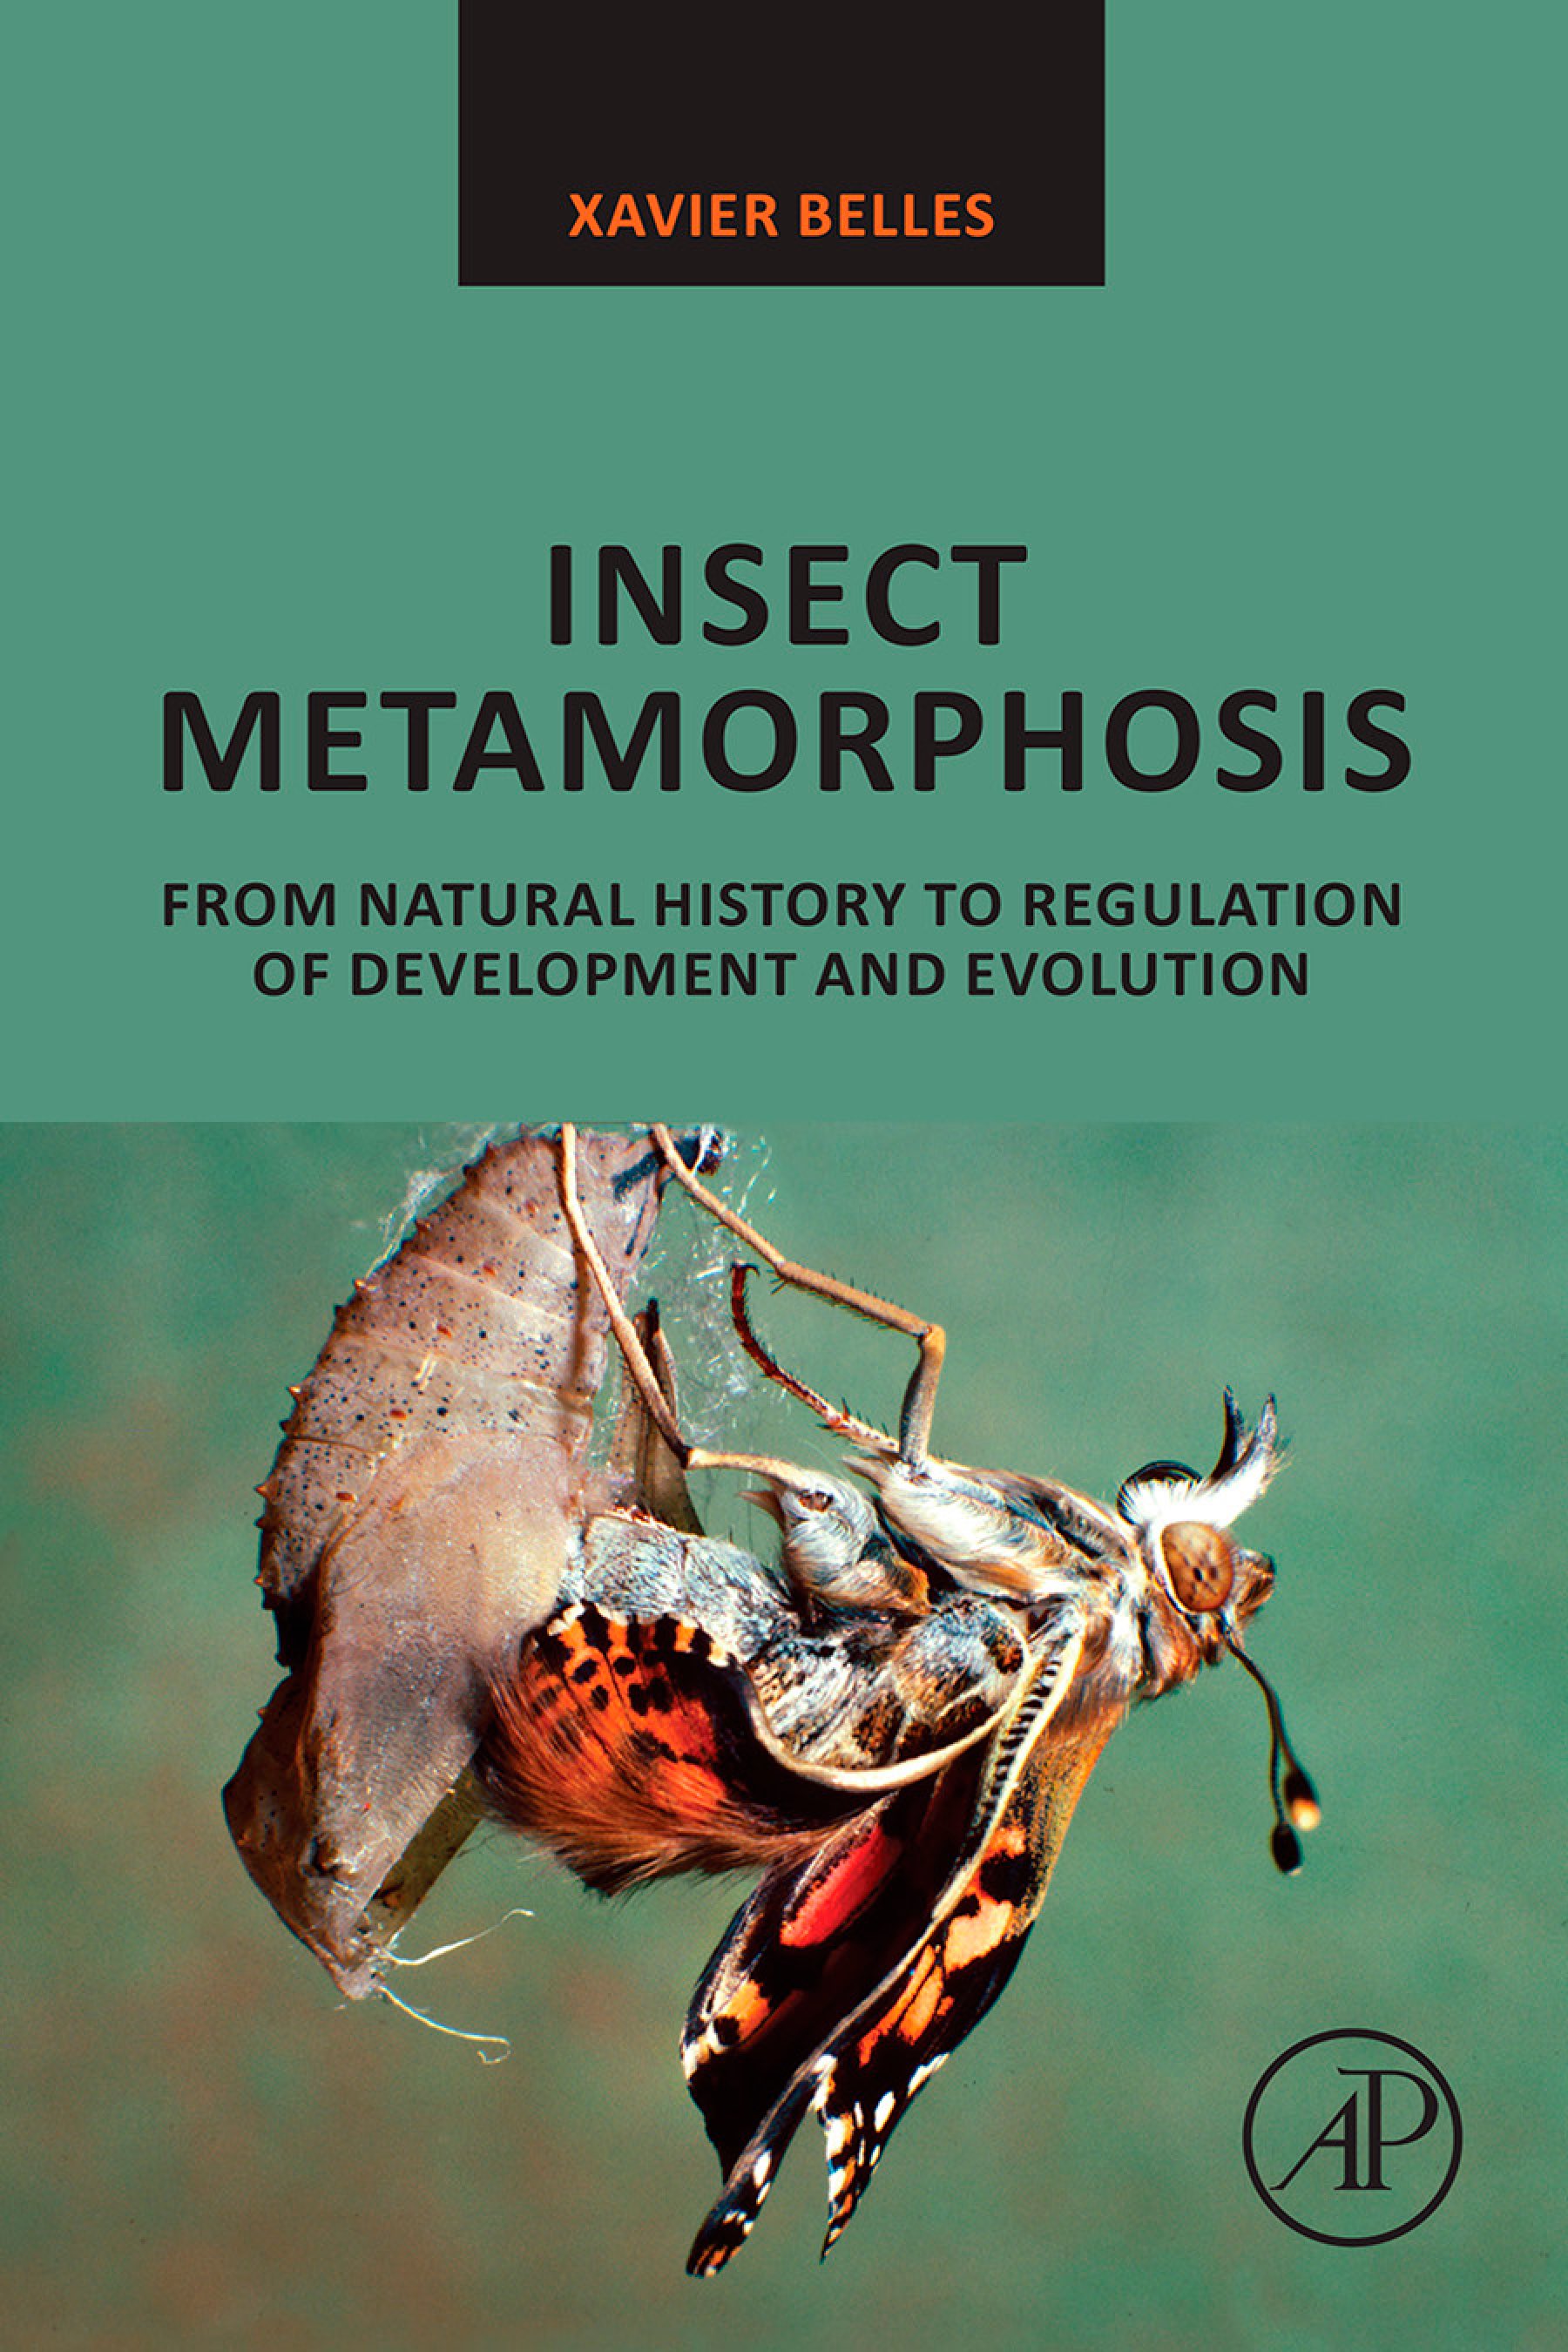 Insect Metamorphosis: From Natural History to Regulation of Development and Evolution